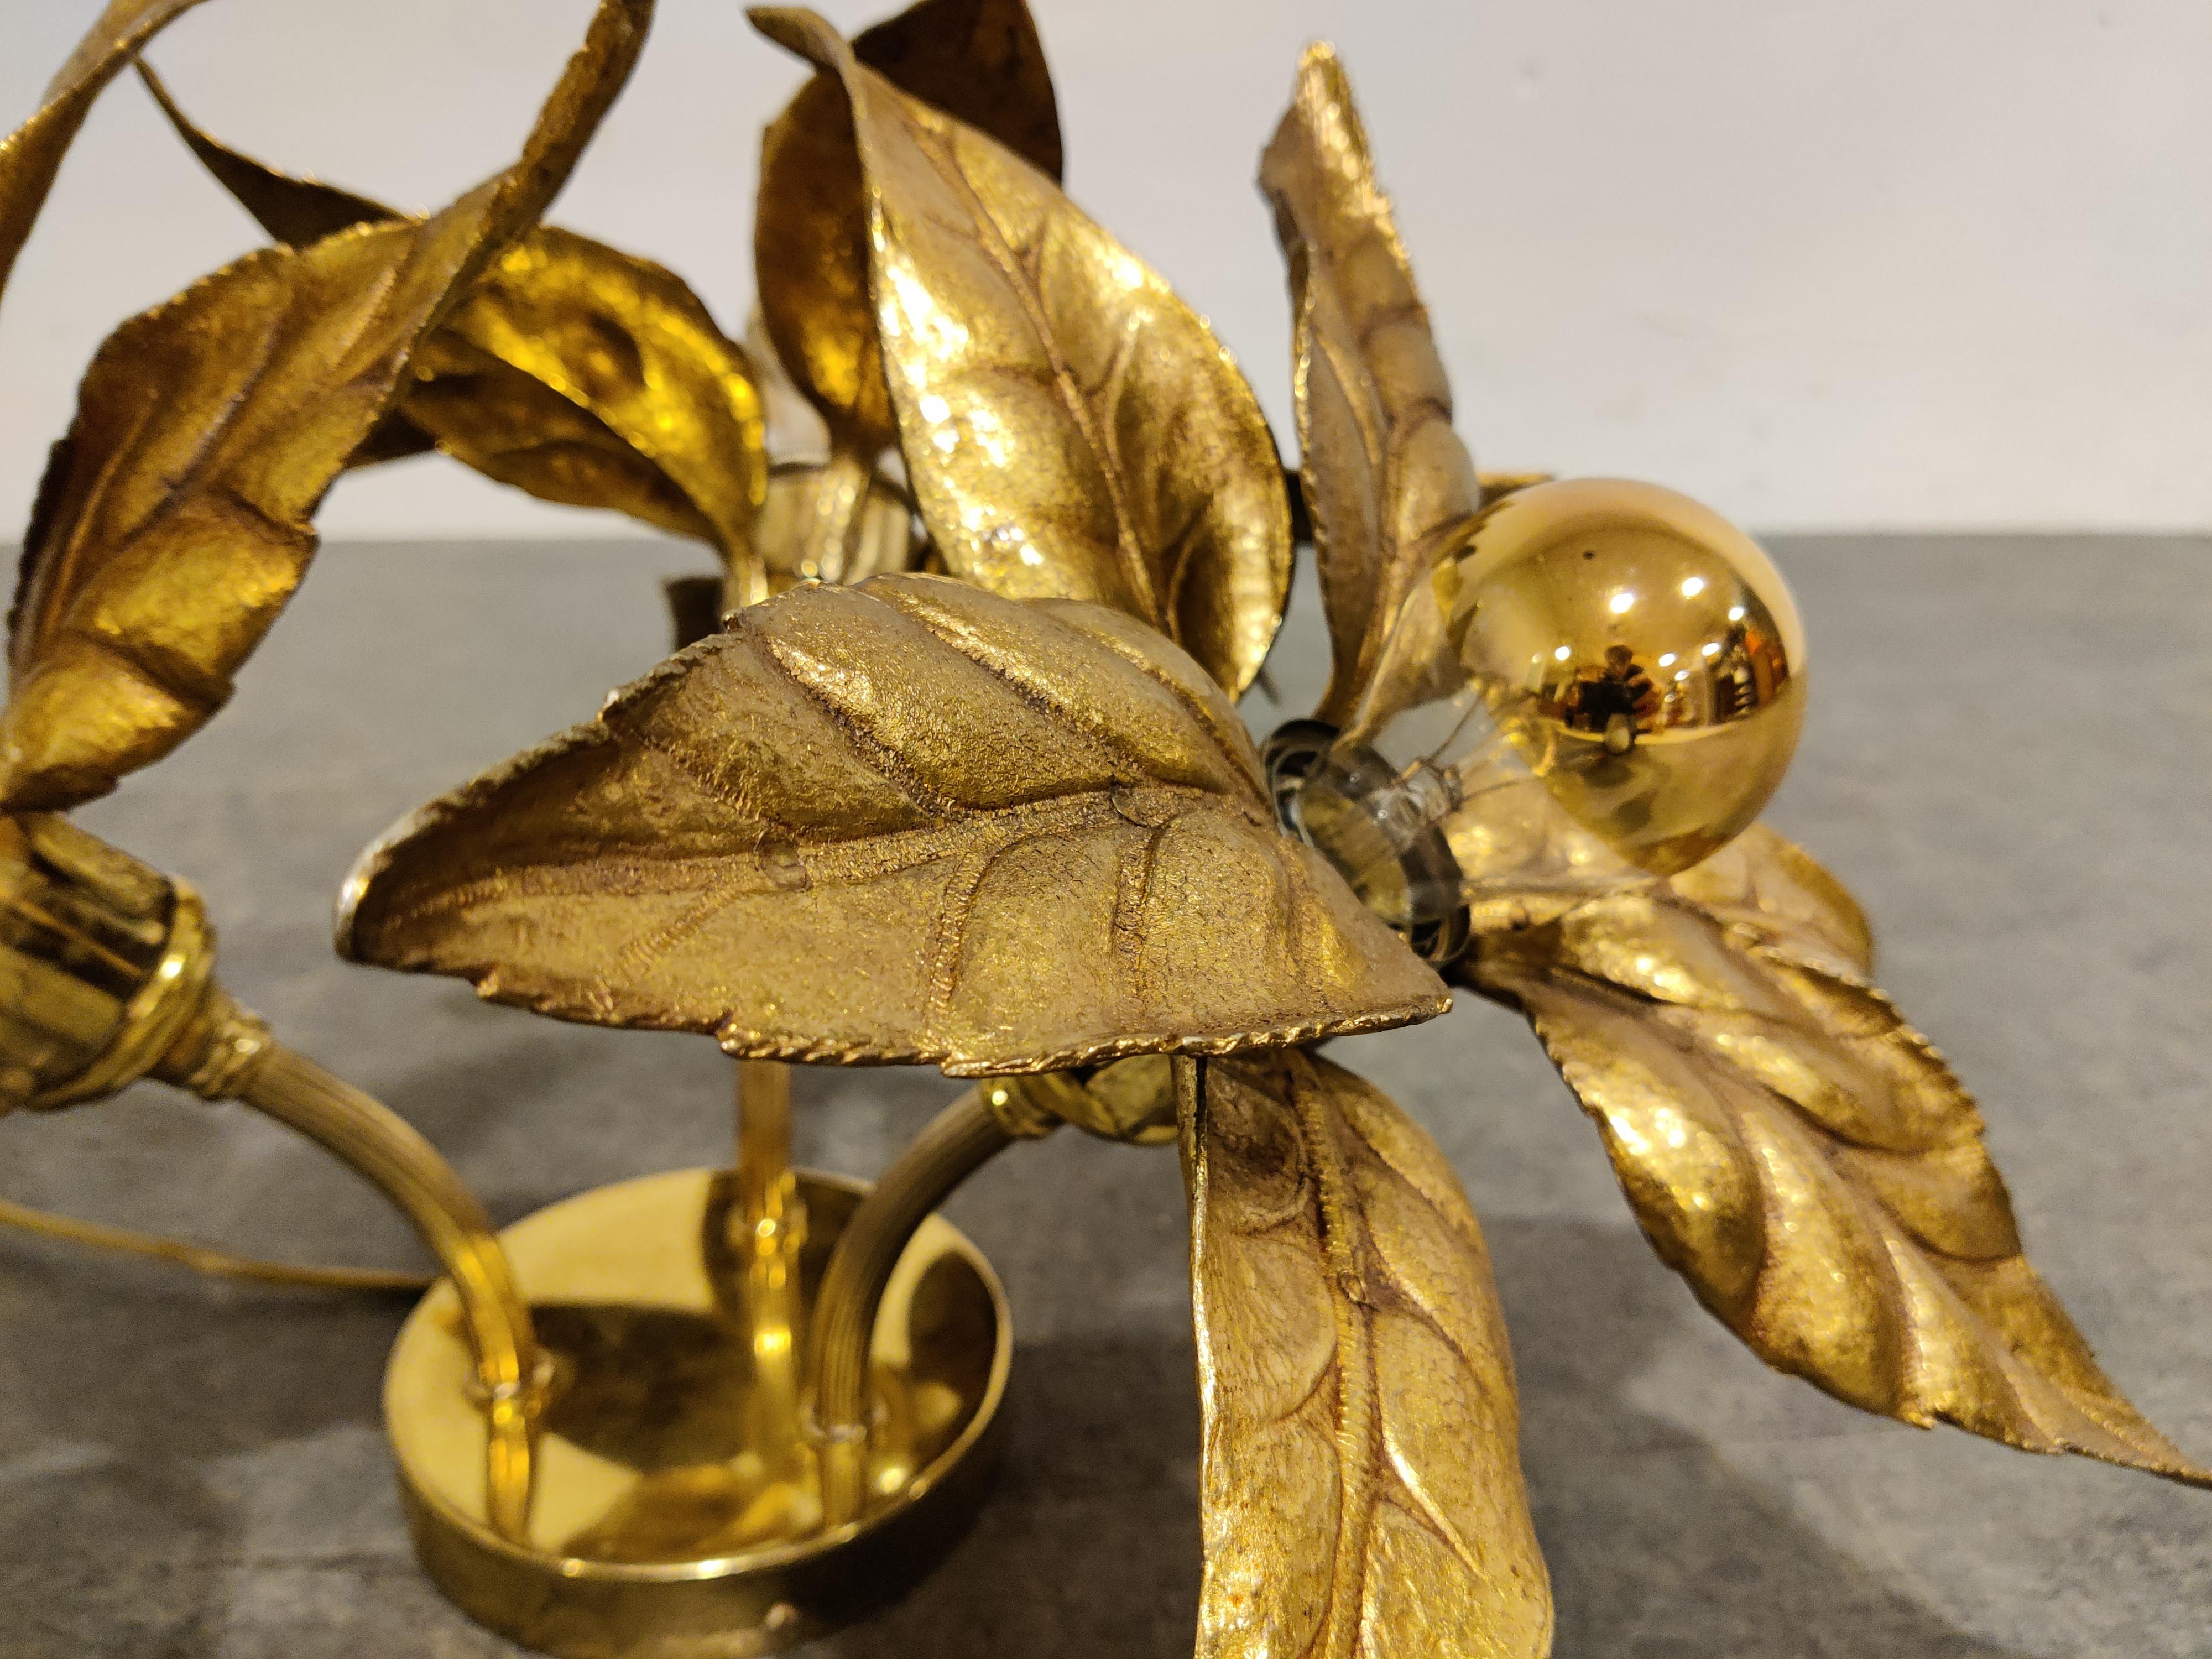 Brass flower lamp by Willy Daro.

Nicely crafted lamp which can be used as table, wall or ceiling light.

Tested and ready for use.

1970's, Belgium. 

Dimensions: 
Height: 32cm/12.59